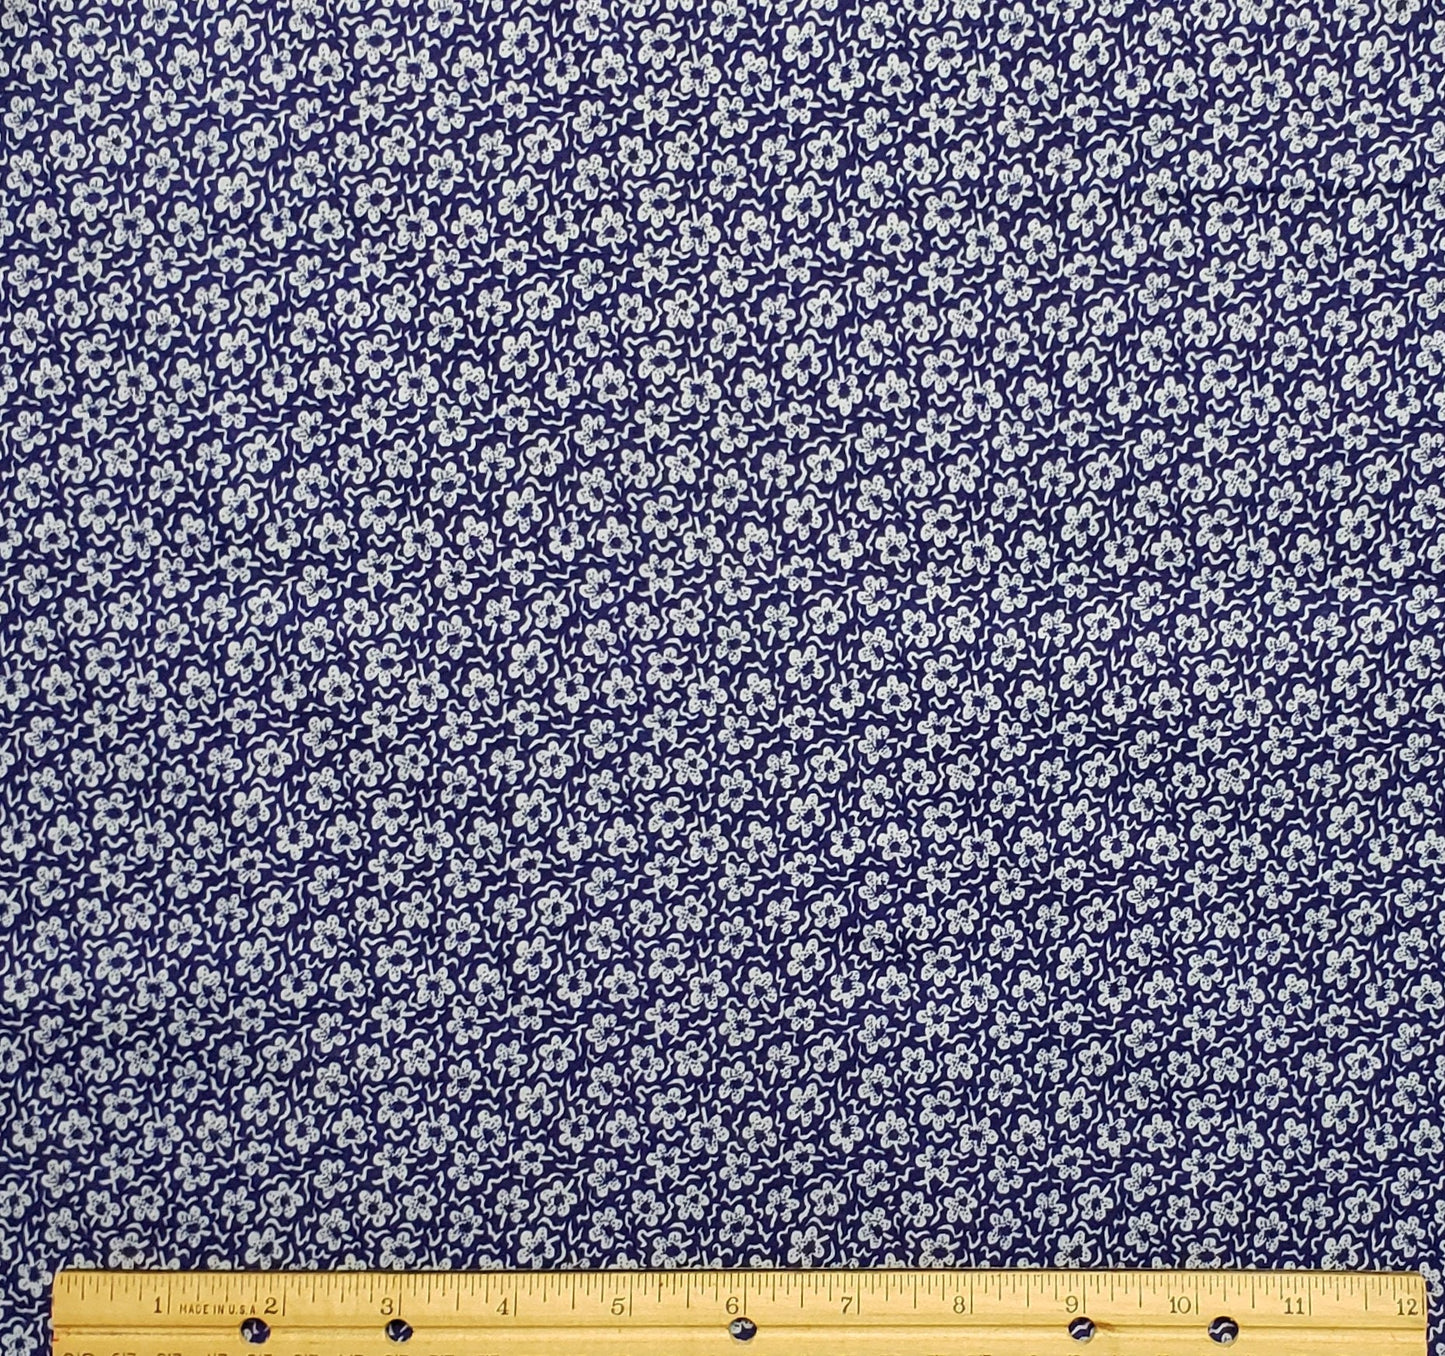 Dark Blue Fabric / White Flower Print - Selvage to Selvage Print